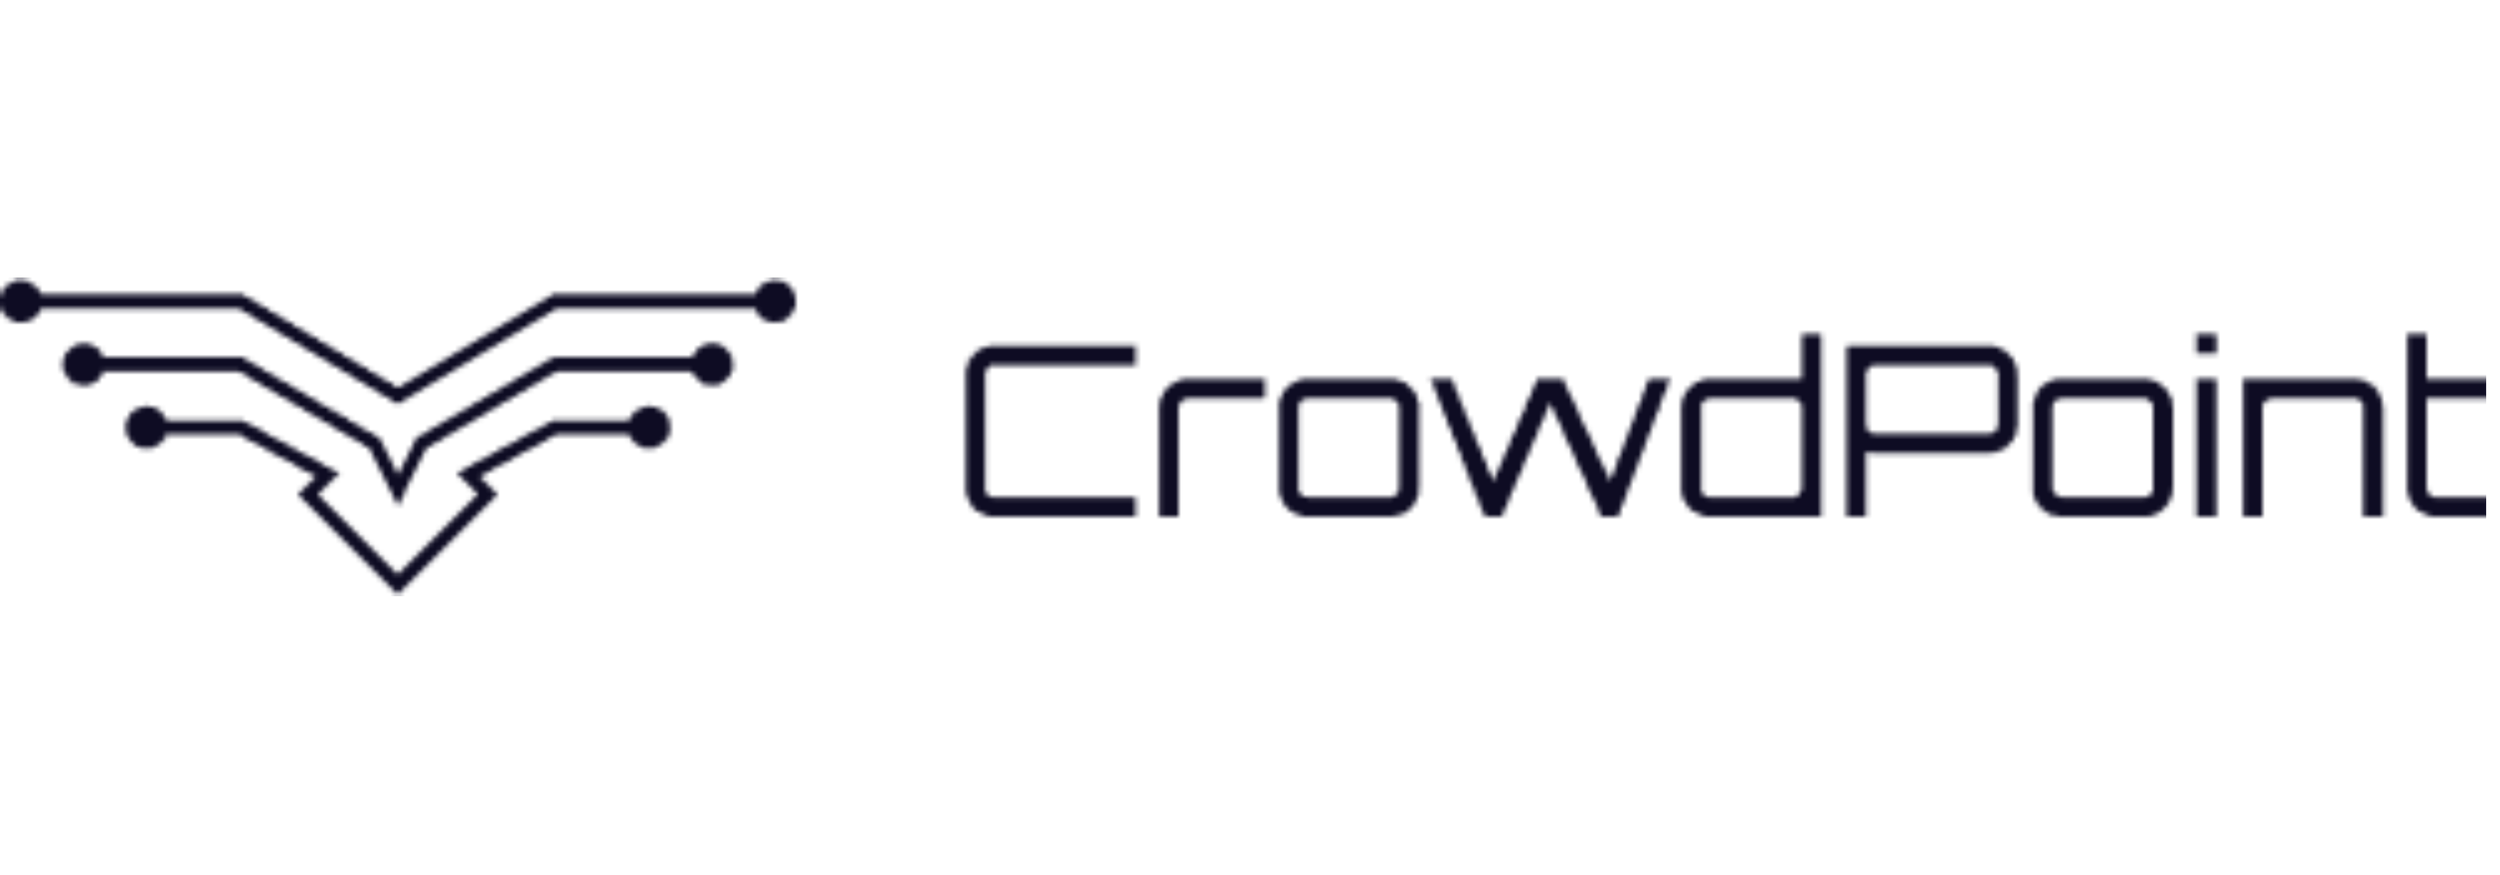 crowdpoint logo.png